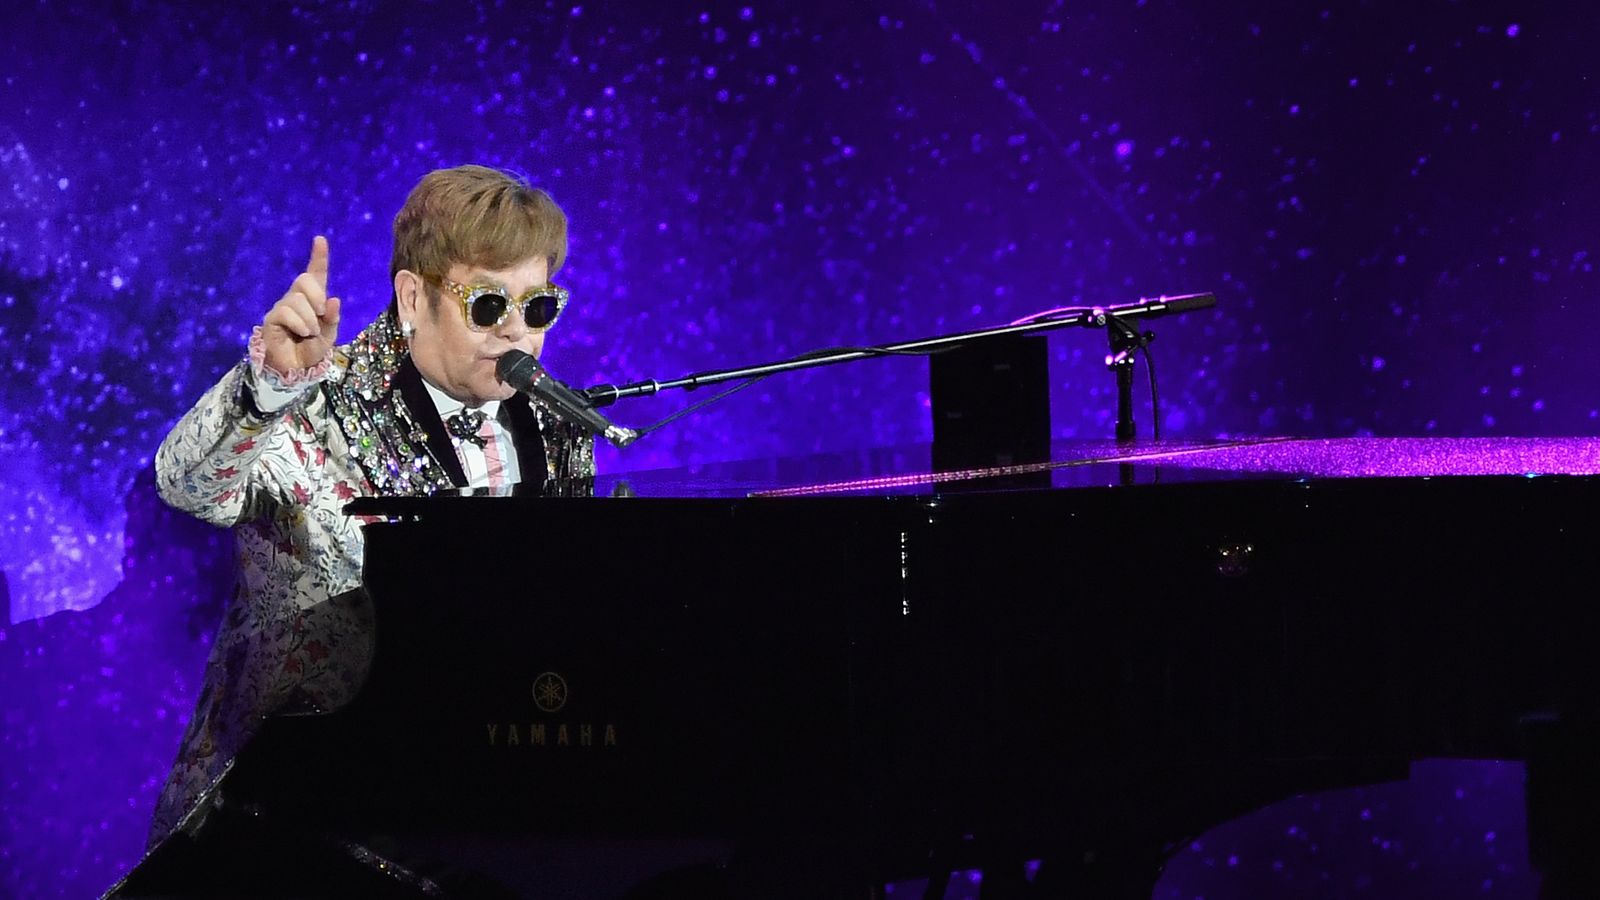 Singer Sir Elton John announces final tour: 'I want to go out with a bang' | Ents ...